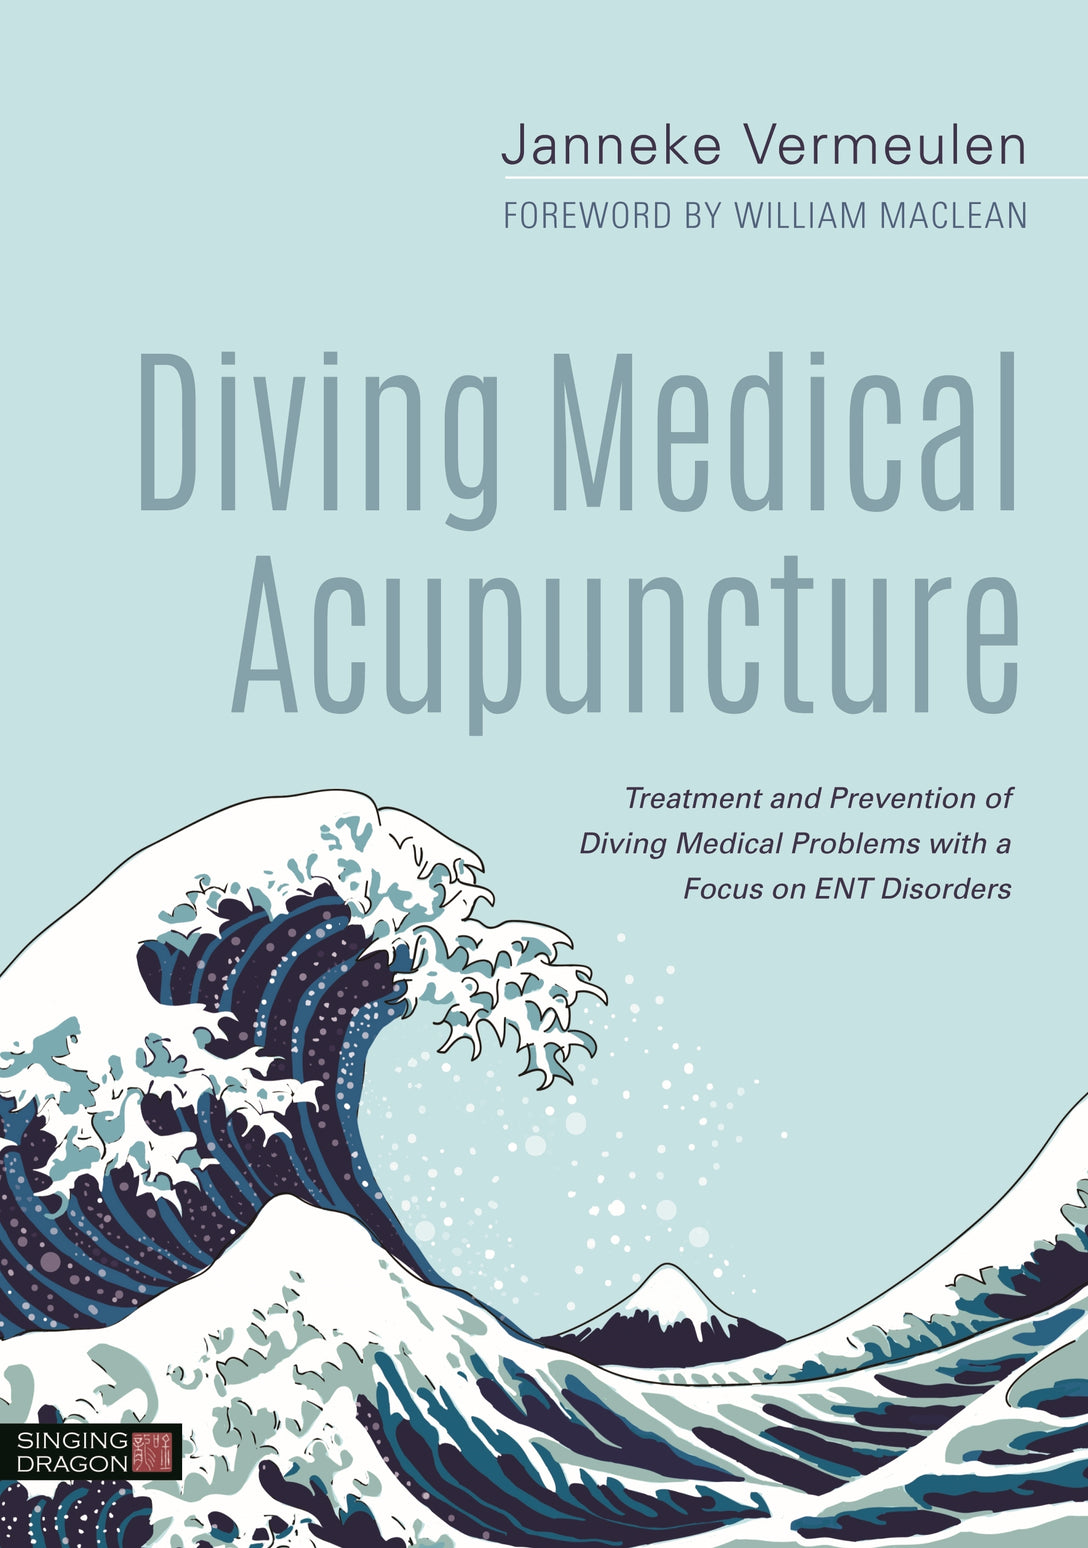 Diving Medical Acupuncture by Janneke Vermeulen, Will Maclean